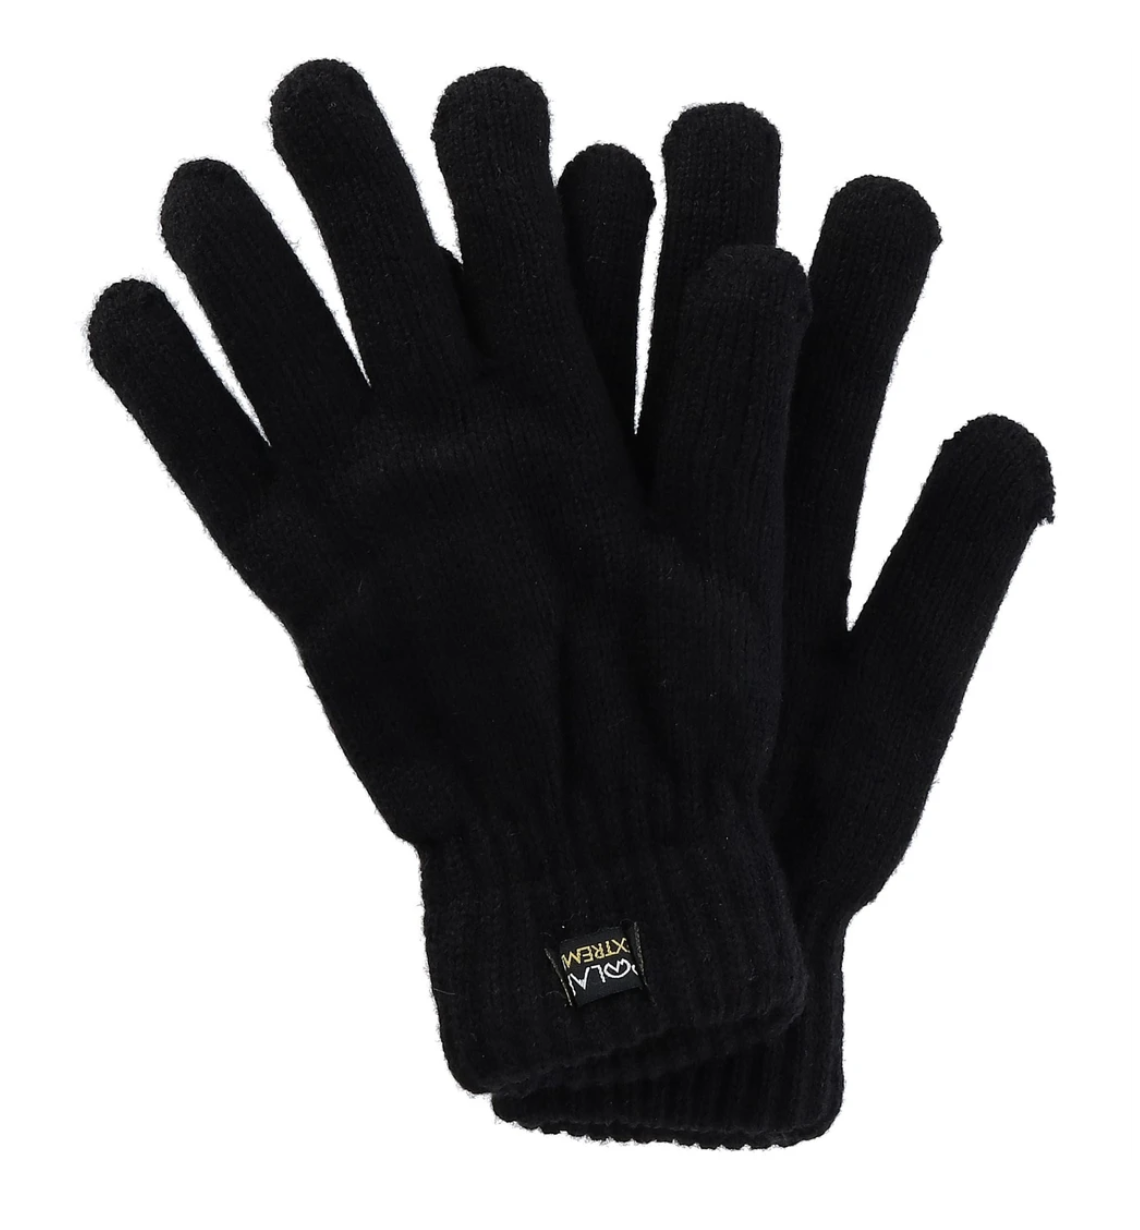 Insulated Knit Gloves Men's by Polar Extreme